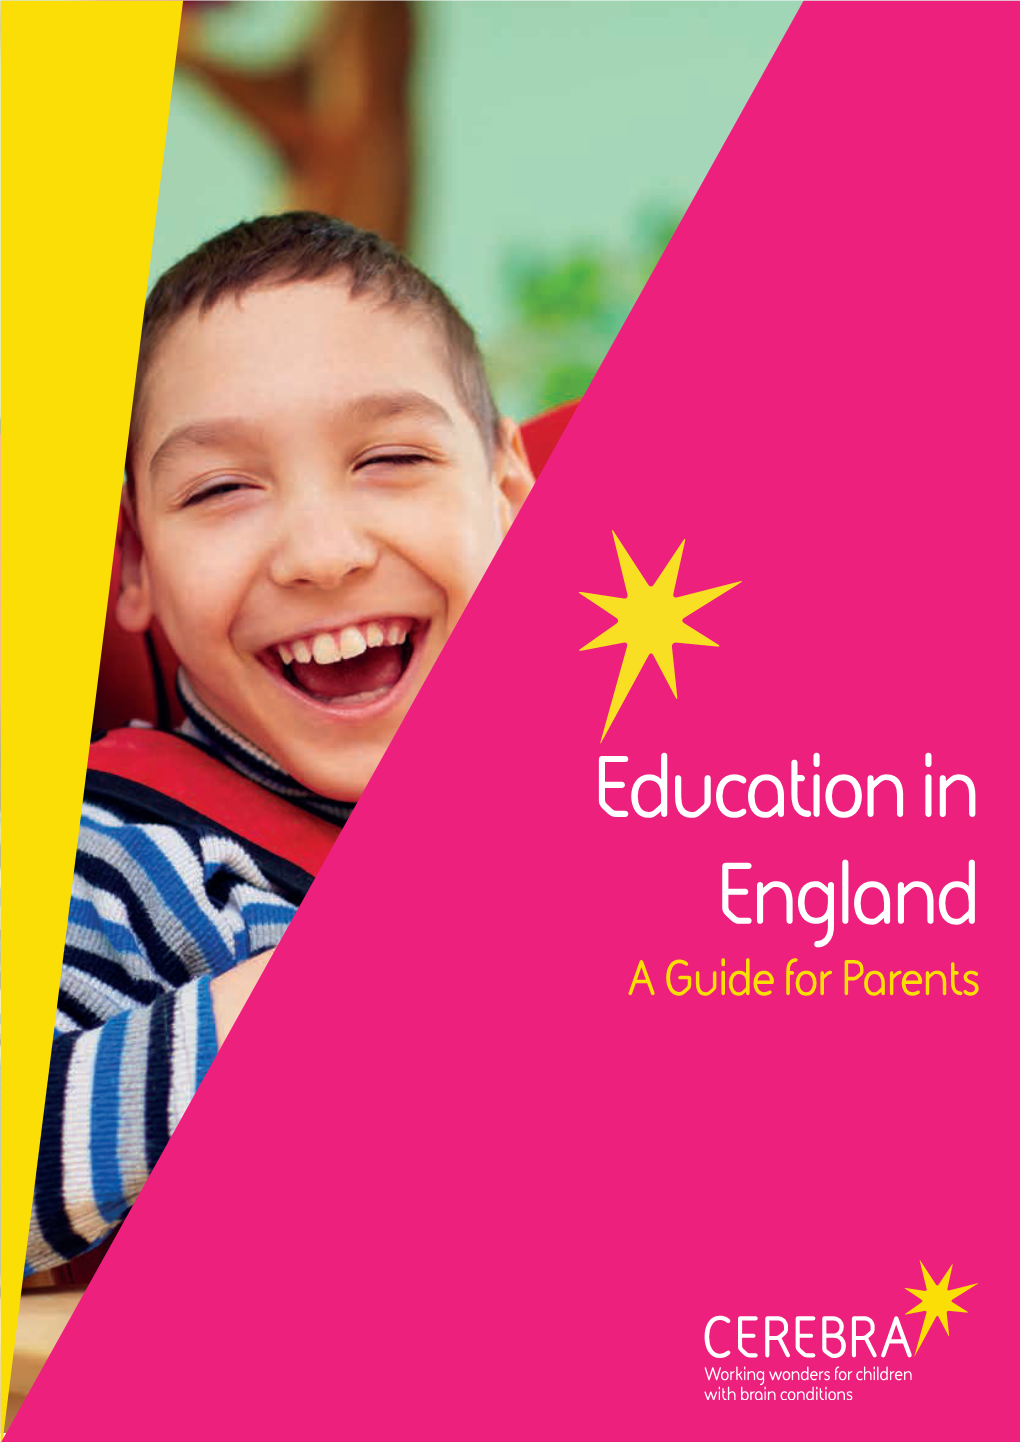 Education in England: a Guide for Parents